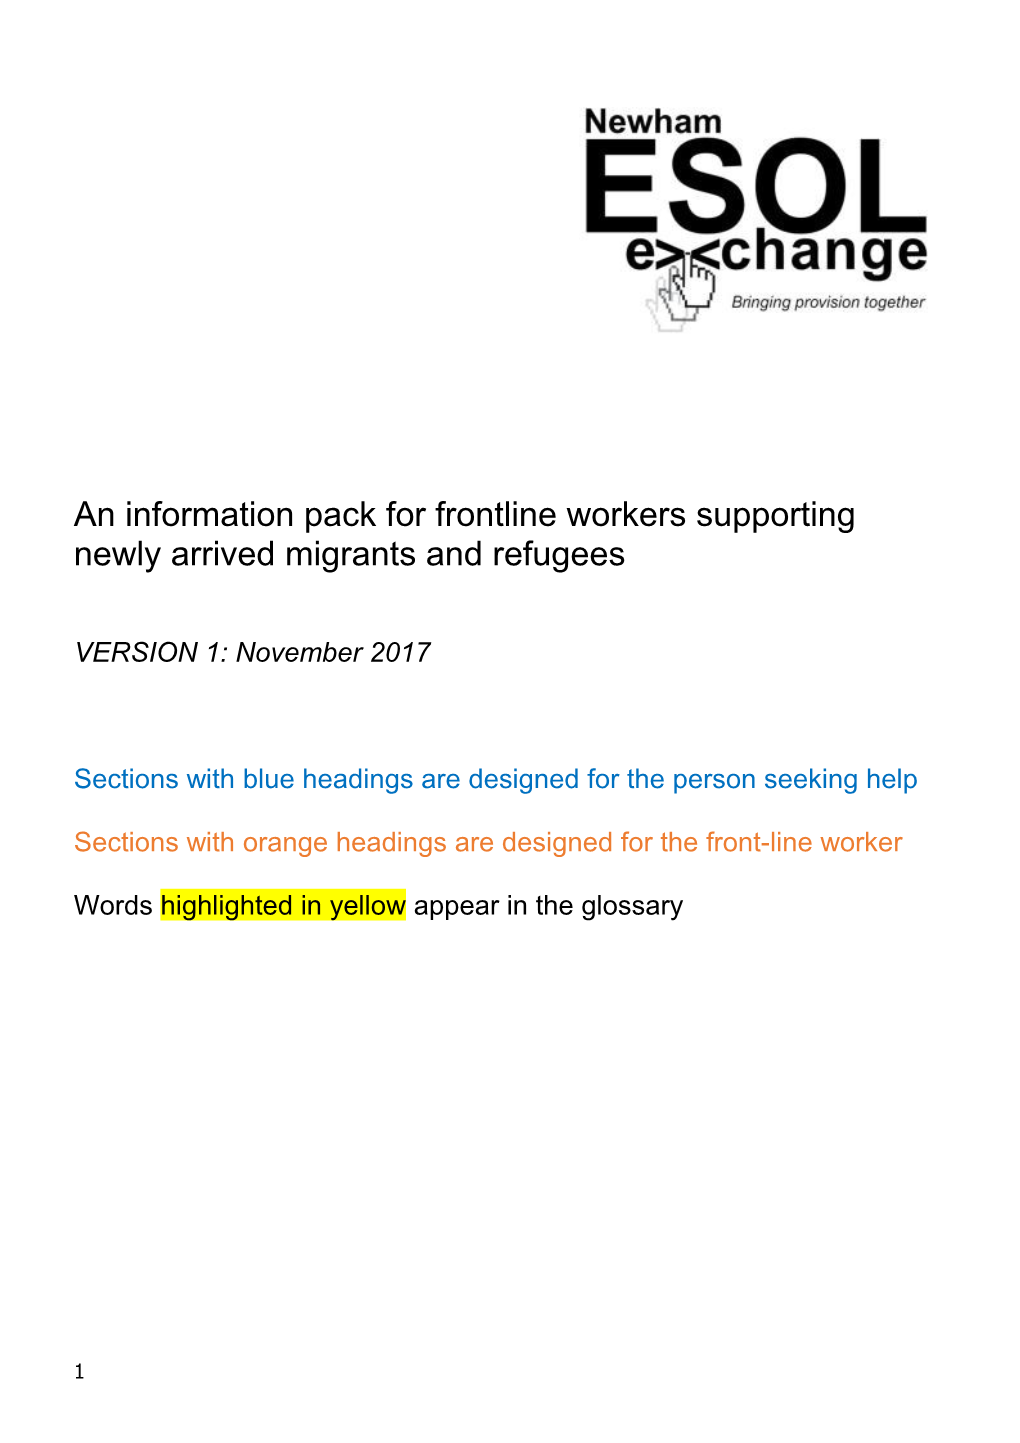 An Information Pack for Frontline Workers Supporting Newly Arrived Migrants and Refugees